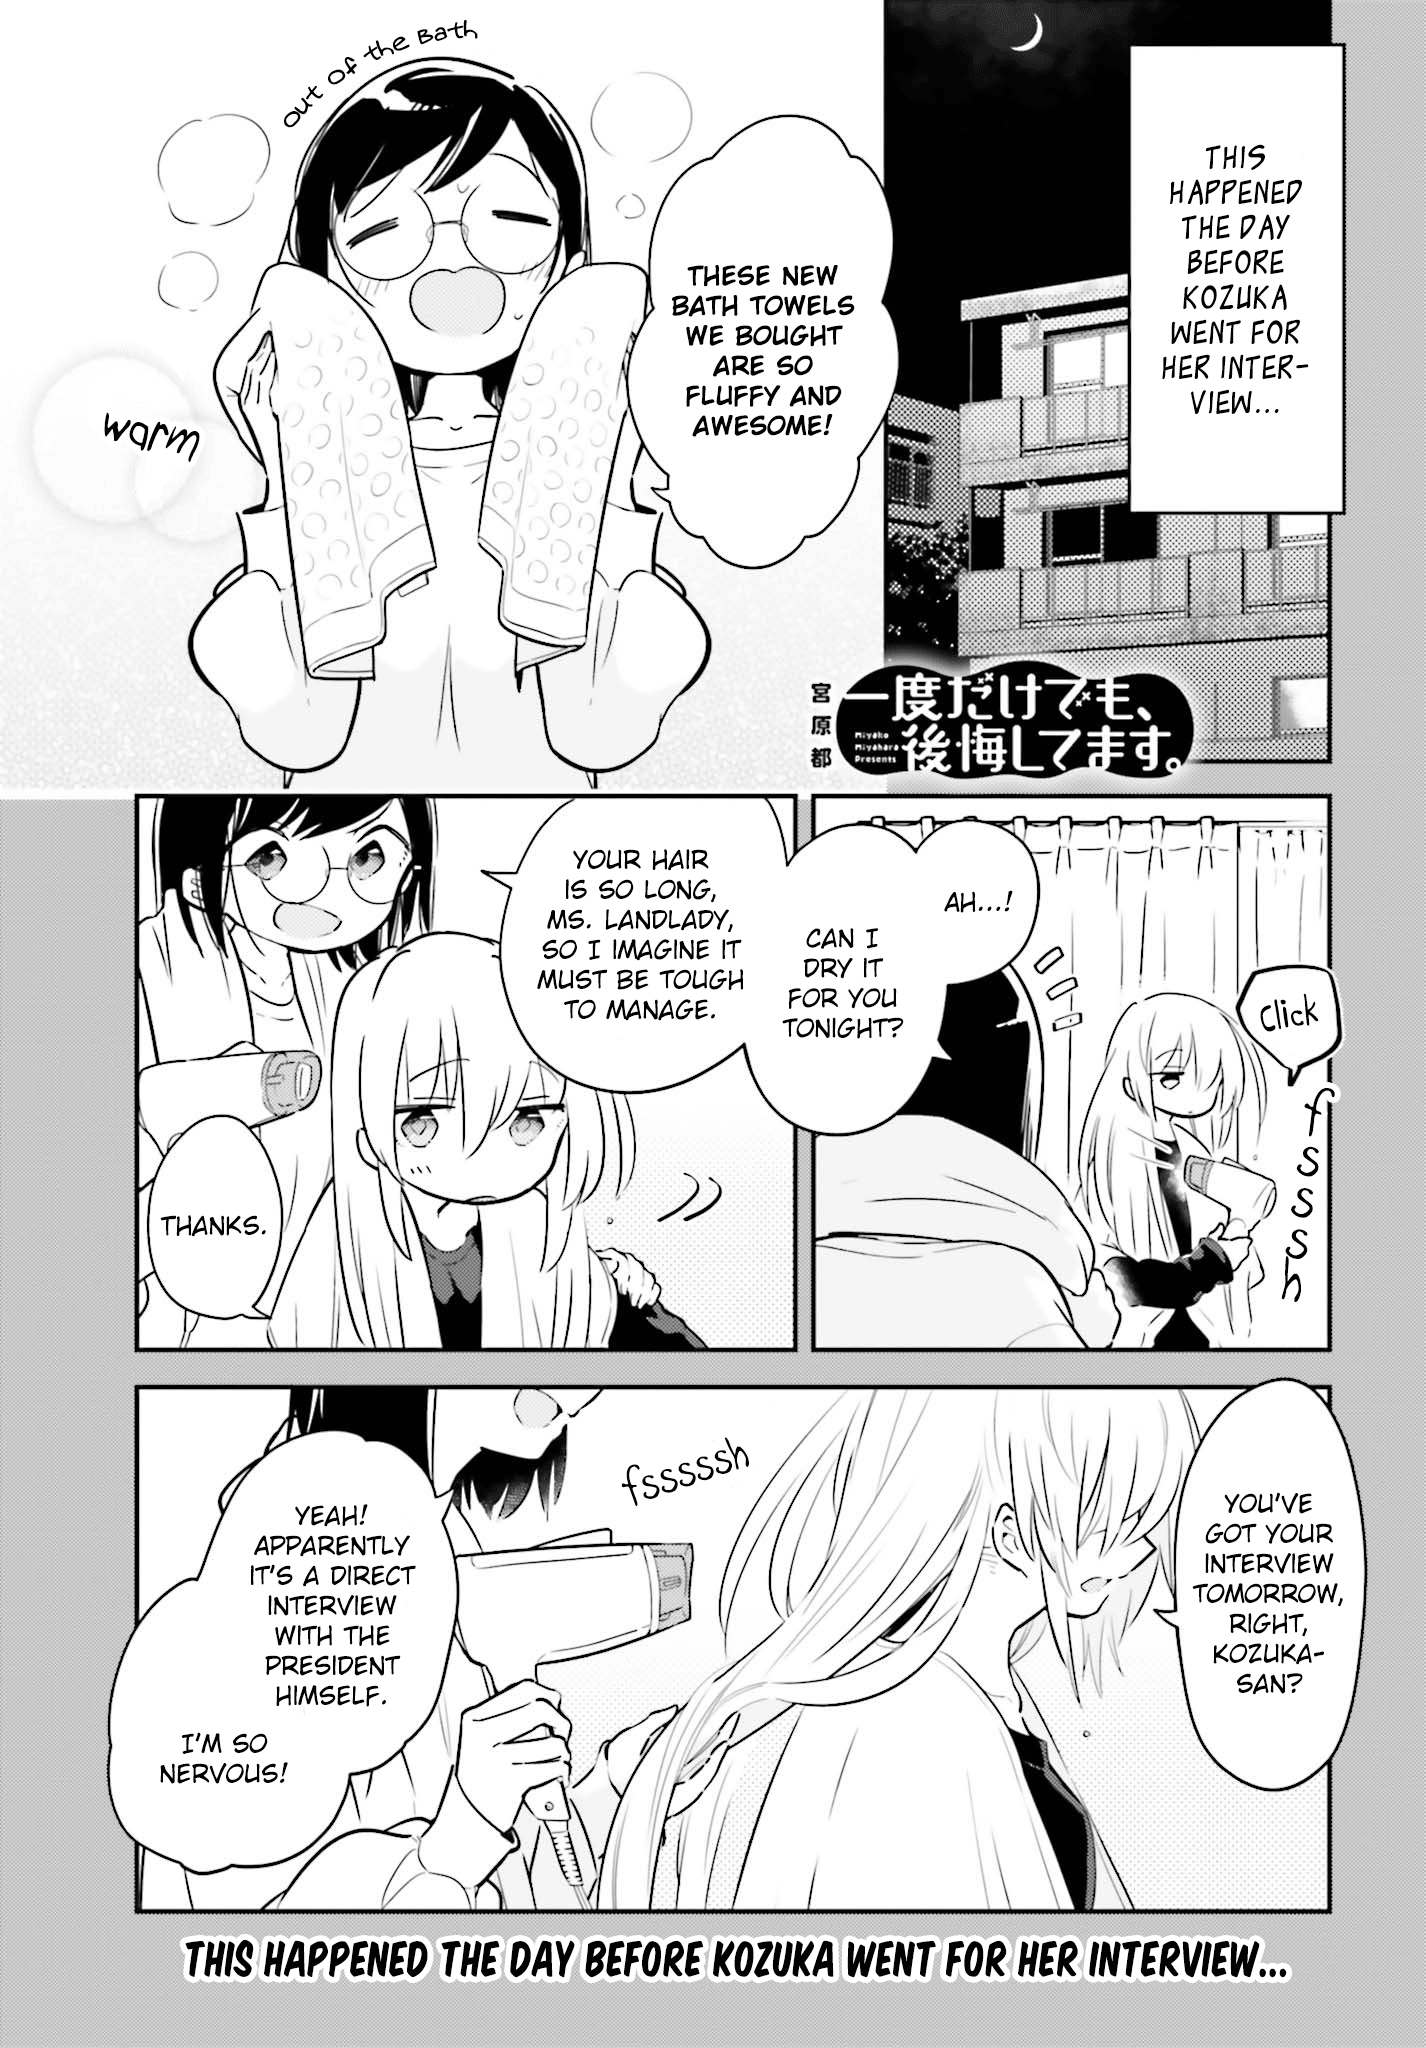 Even If It Was Just Once, I Regret It - Page 1